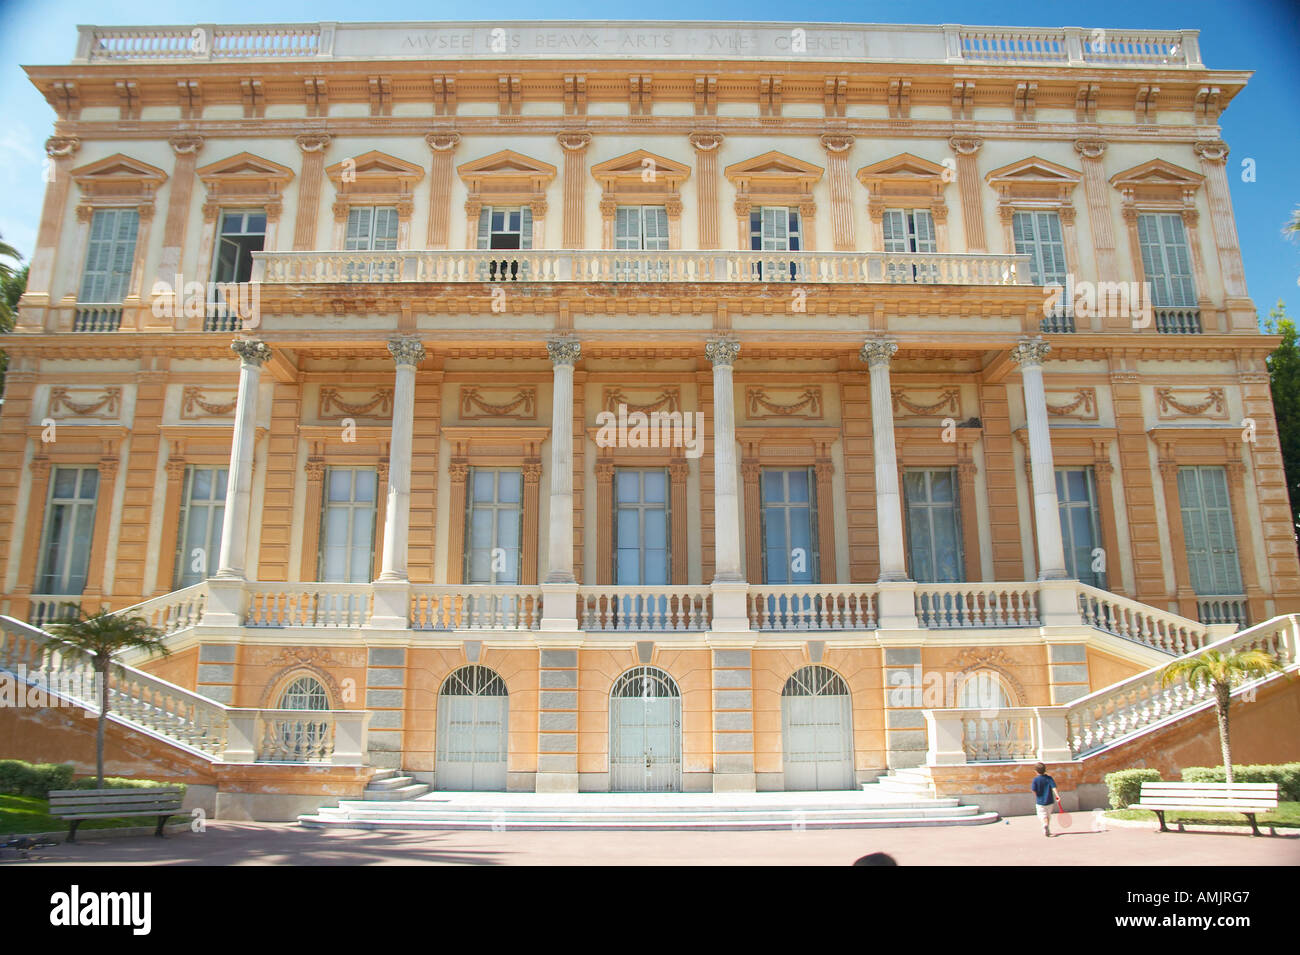 Exterior of the Musee des Beaux Arts Nice France Stock Photo